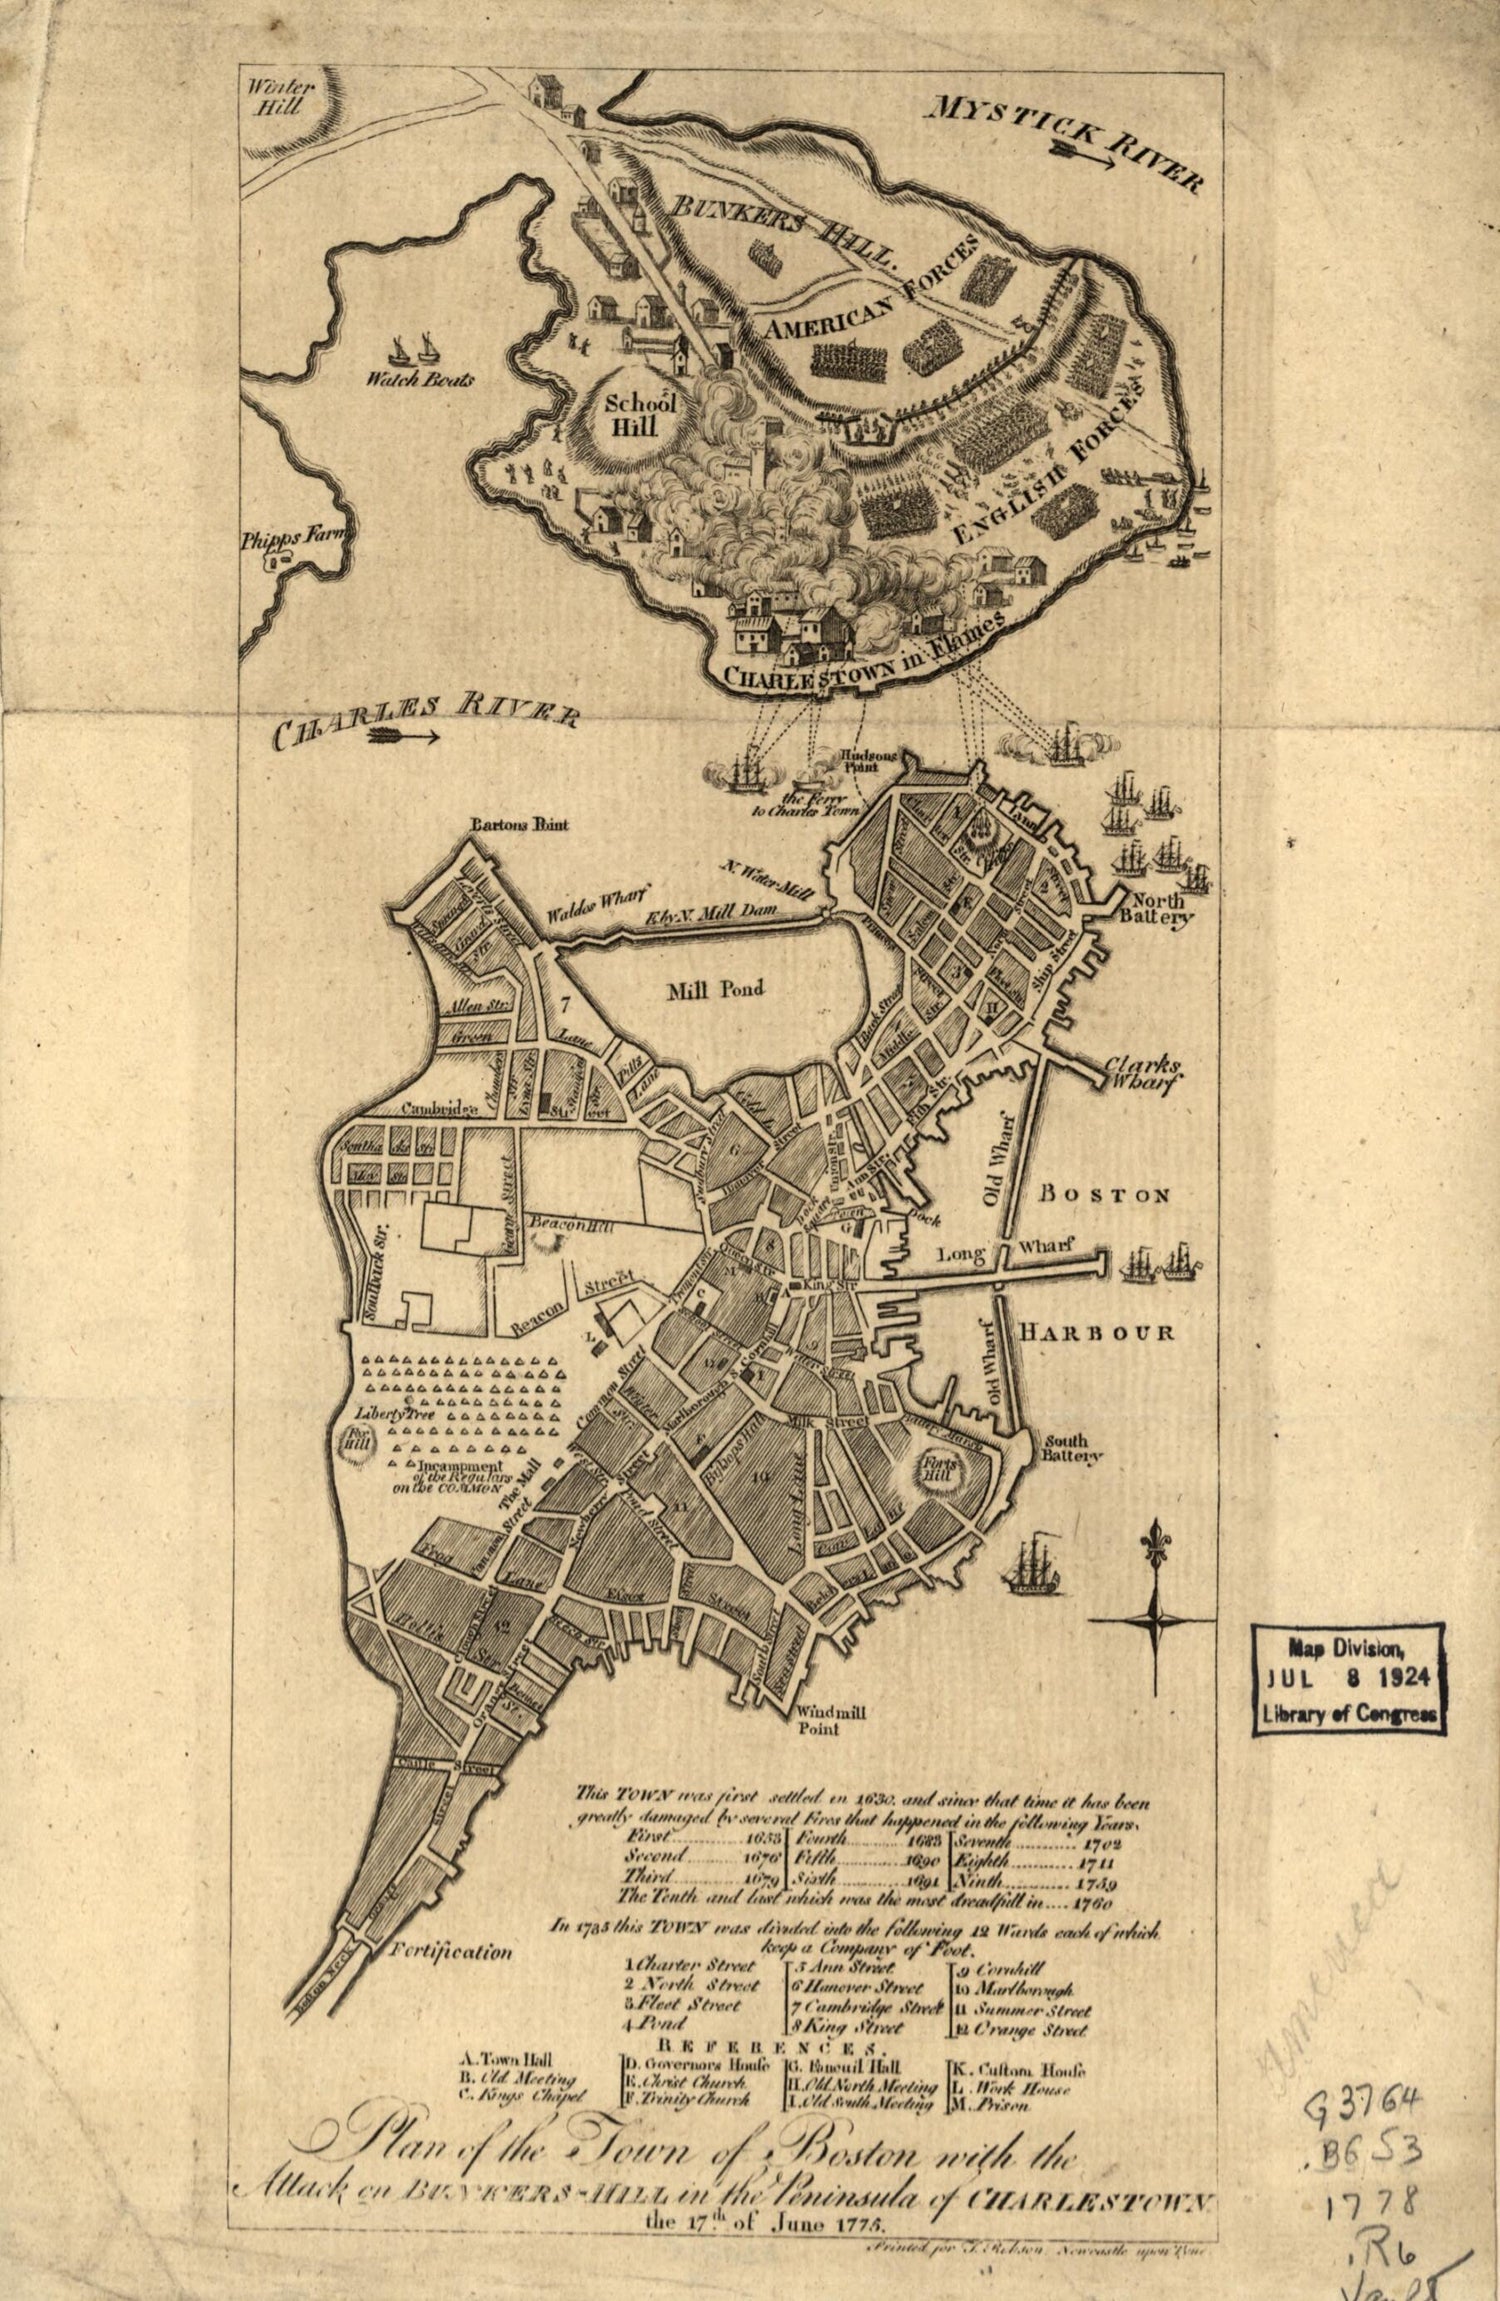 This old map of Hill In the Peninsula of Charlestown, the 17th. of June 1775 from 1778 was created by T. Robson in 1778